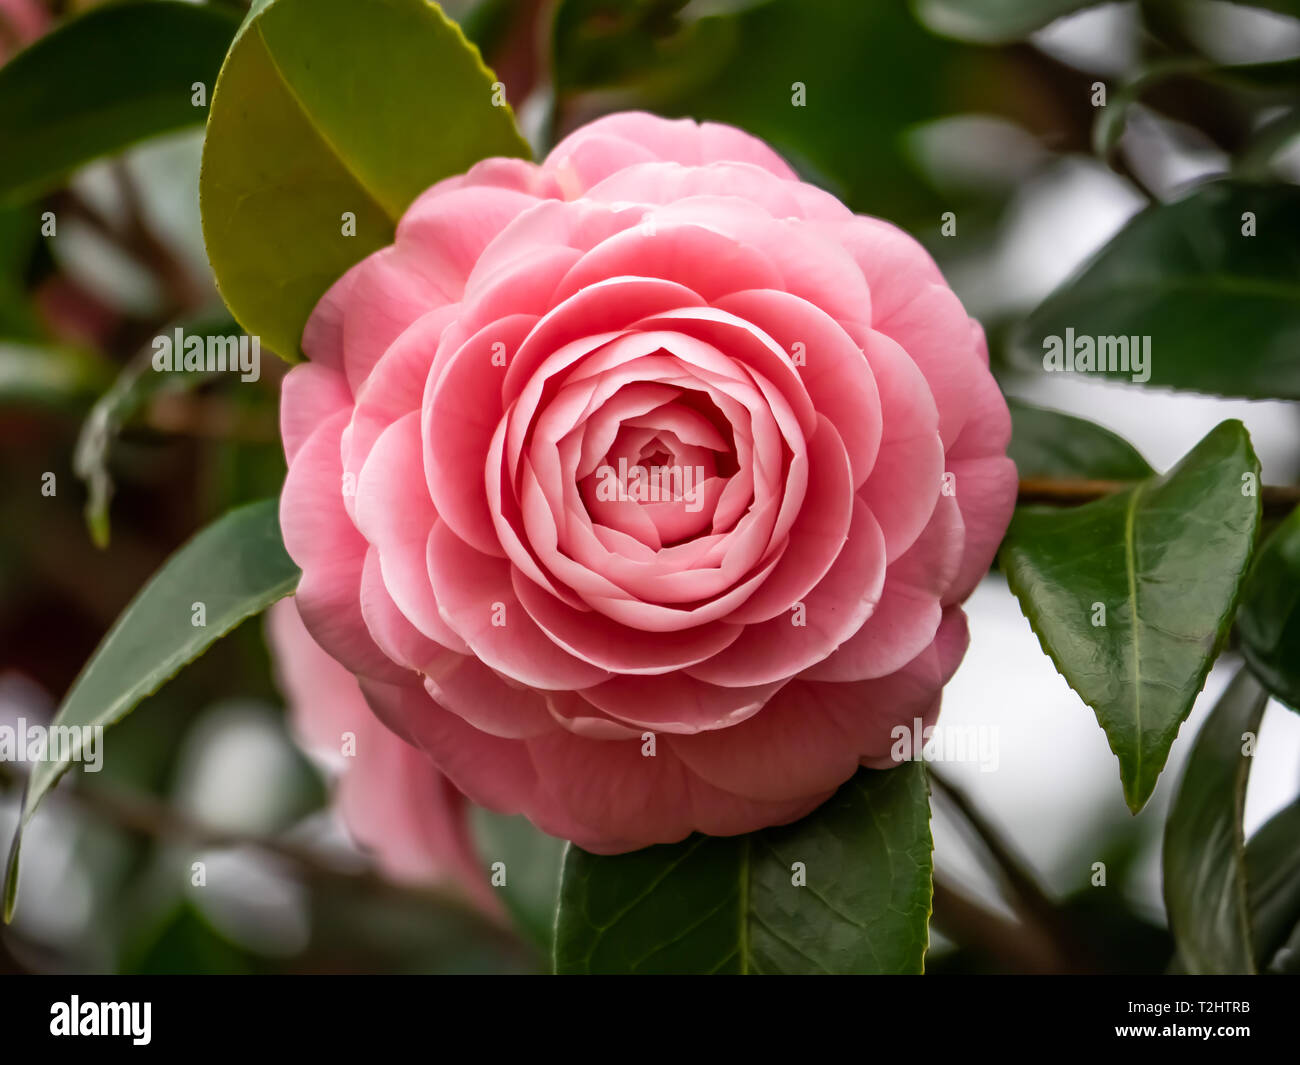 A pink camellia, or Japanese rose, blooms on an early spring day along a  walking path in central Kanagawa Prefecture, Japan Stock Photo - Alamy